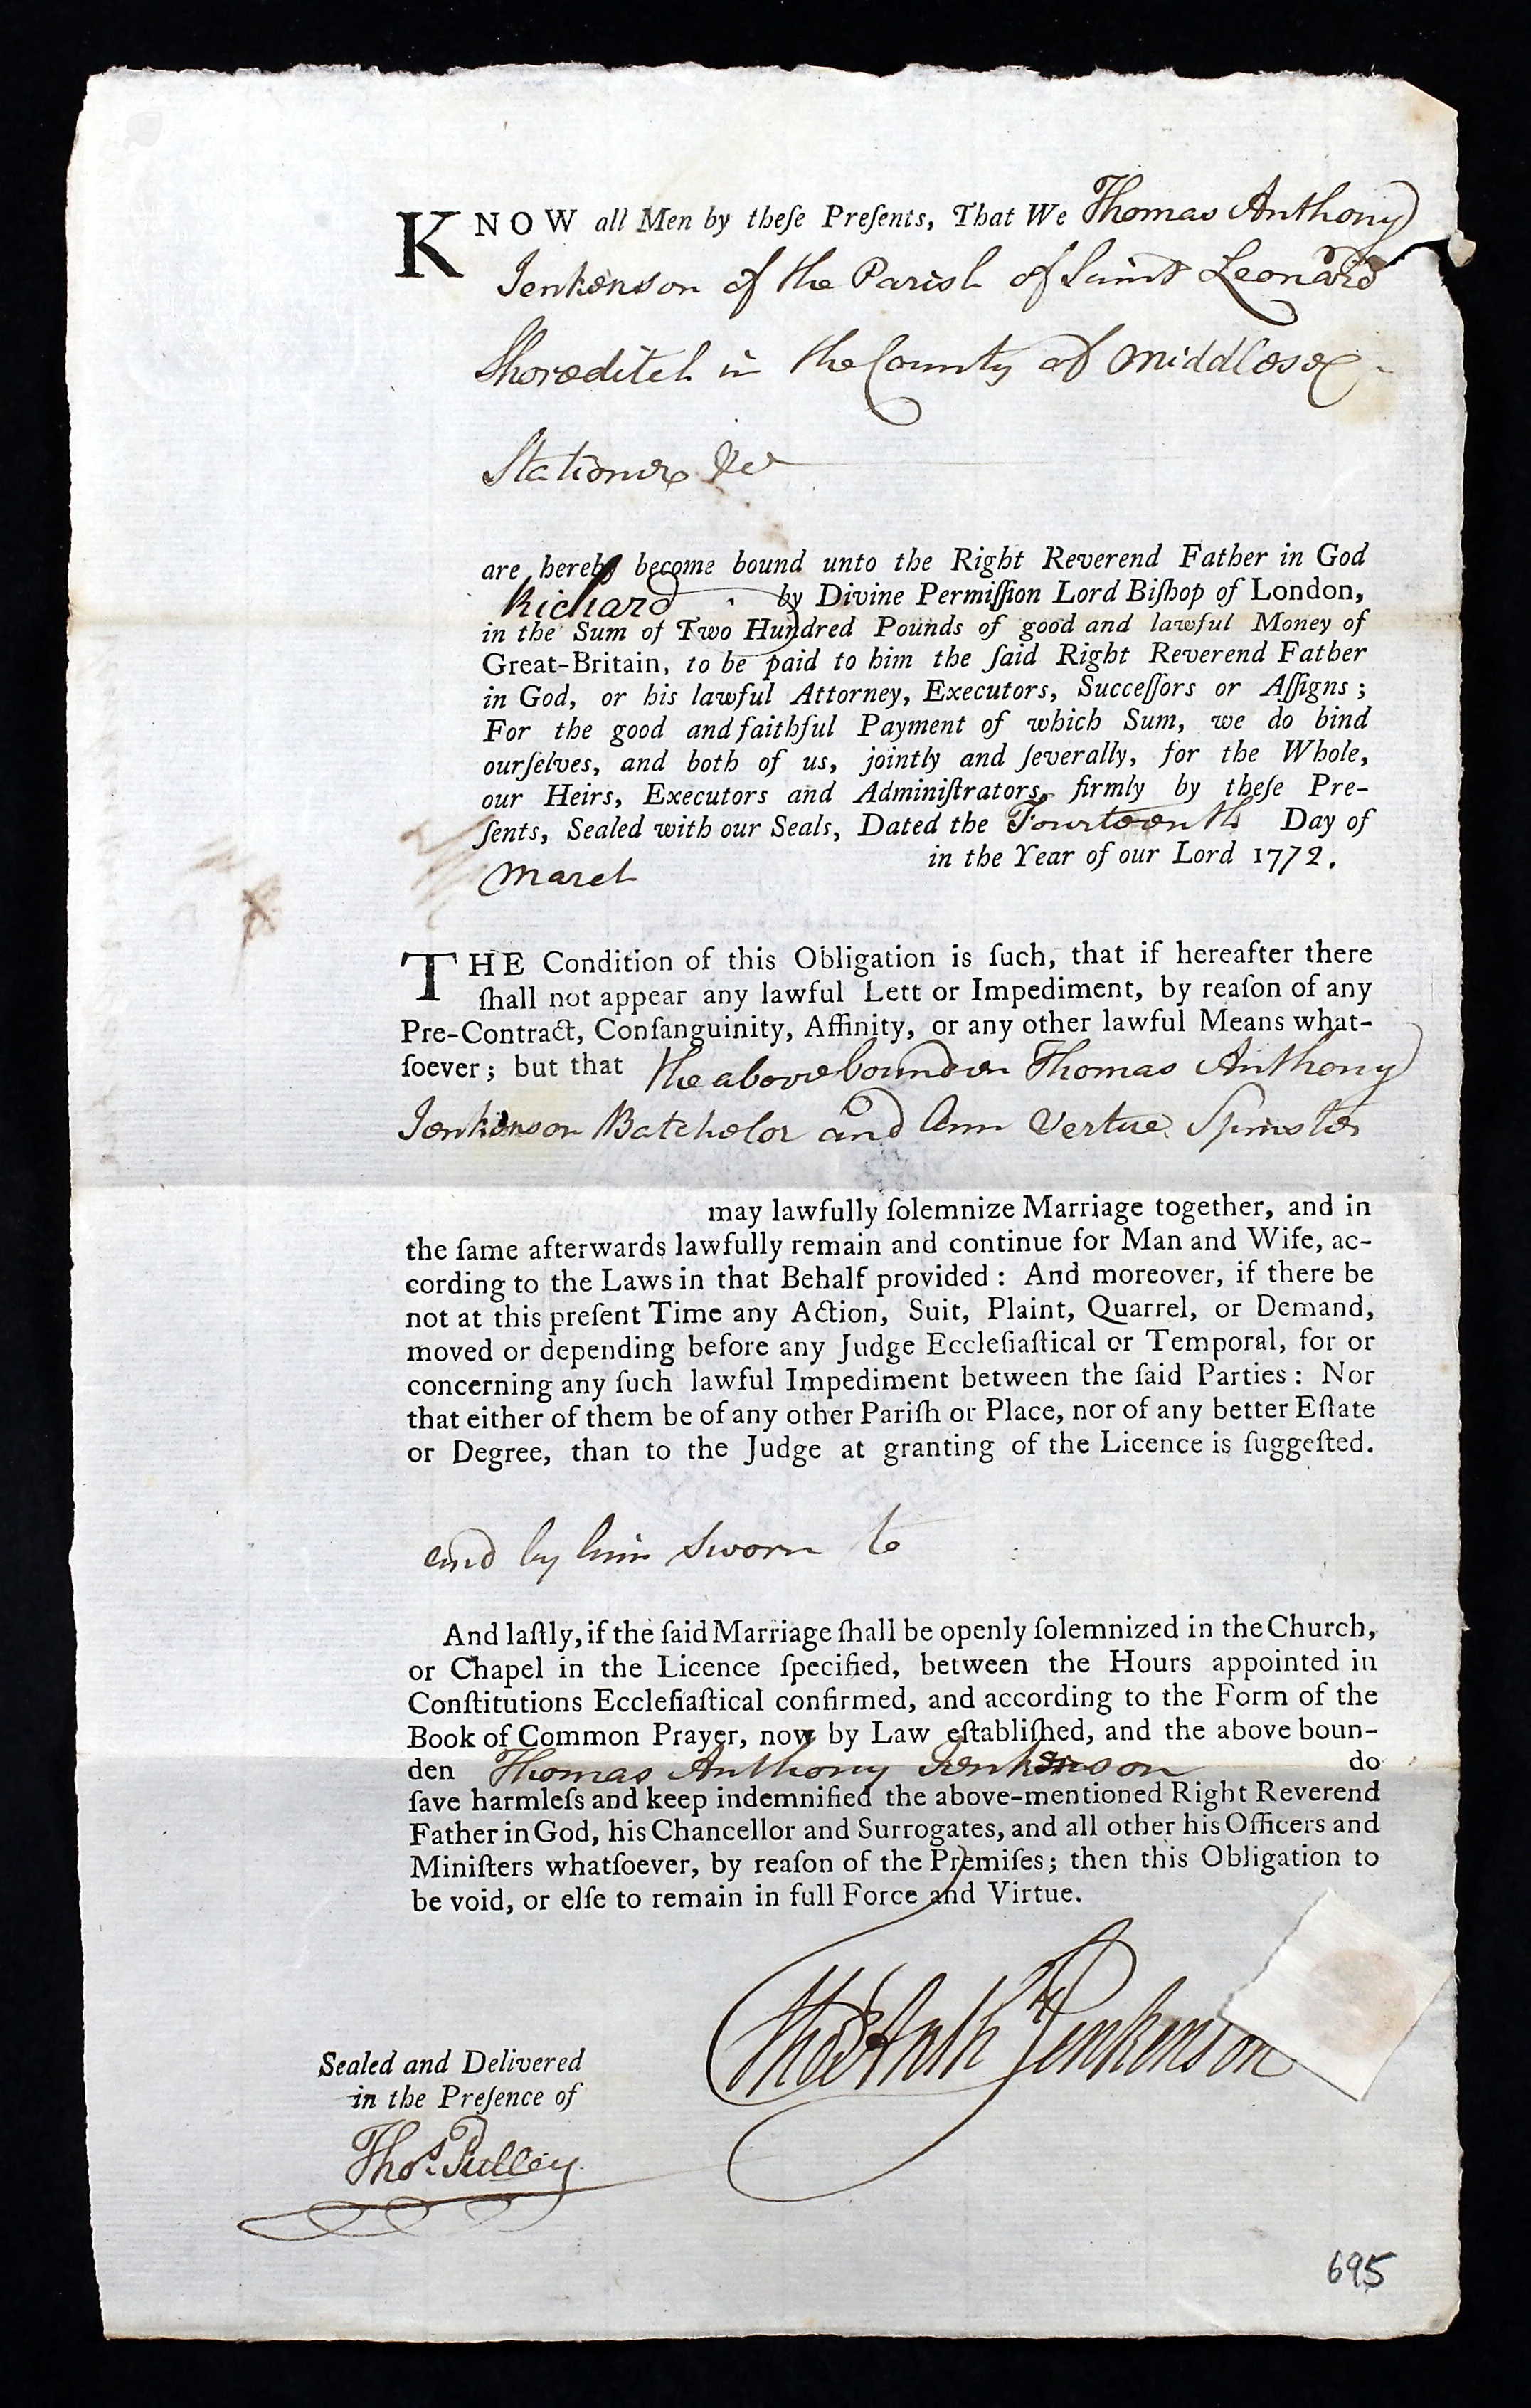 Marriage licence for Thomas Anthony Jenkenson and Ann Vertue, costing £200 a fortune in those days